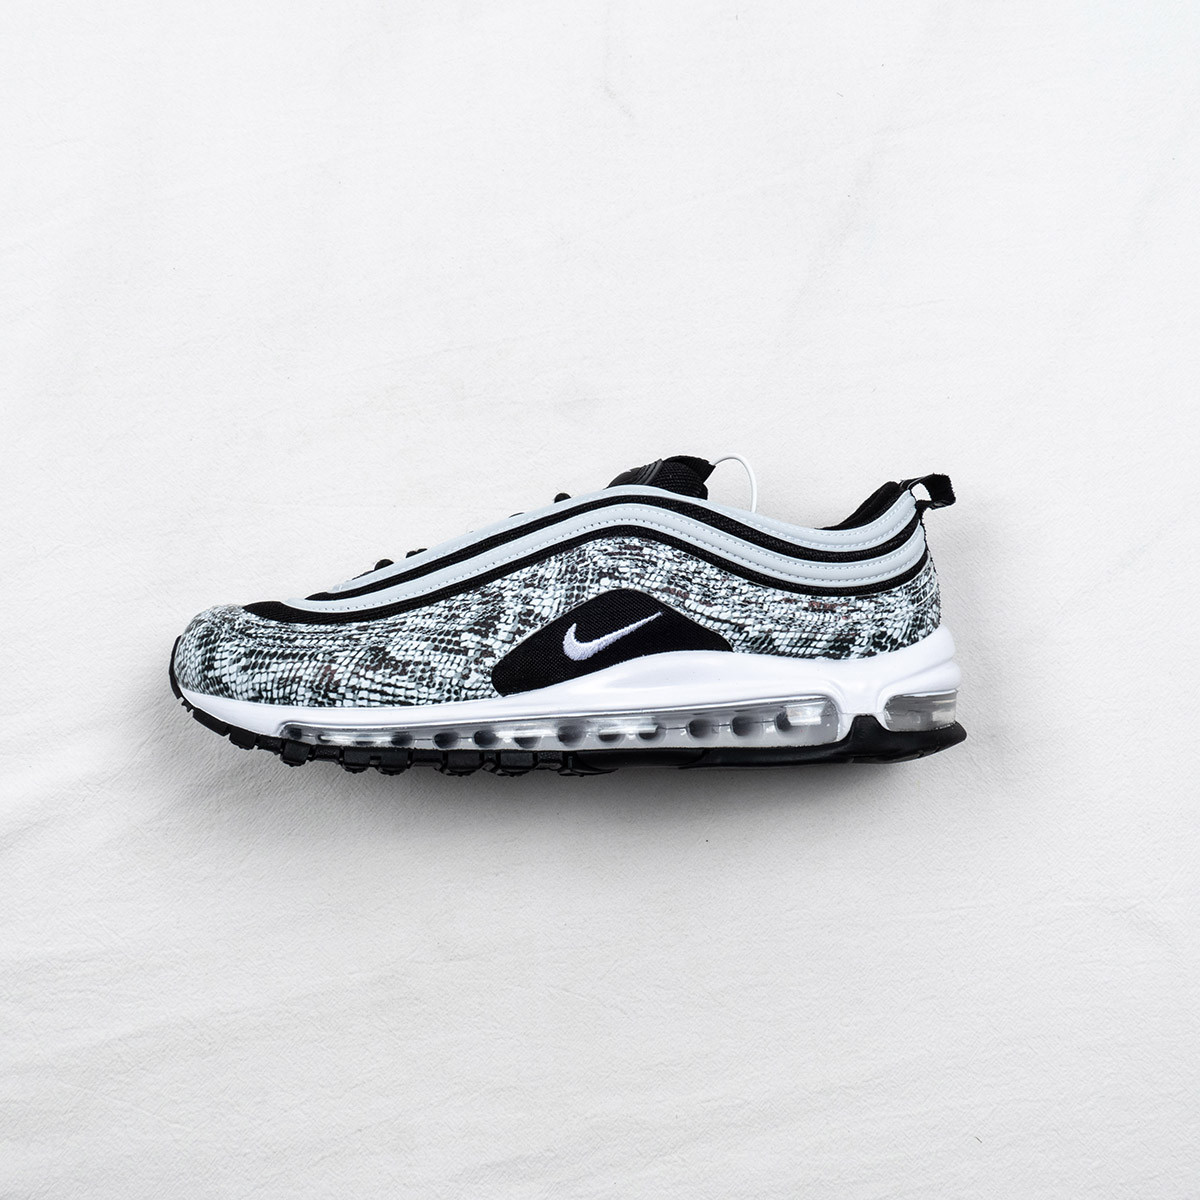 Nike Air Max 97 Cocoa Snake CT1549-001 For Sale